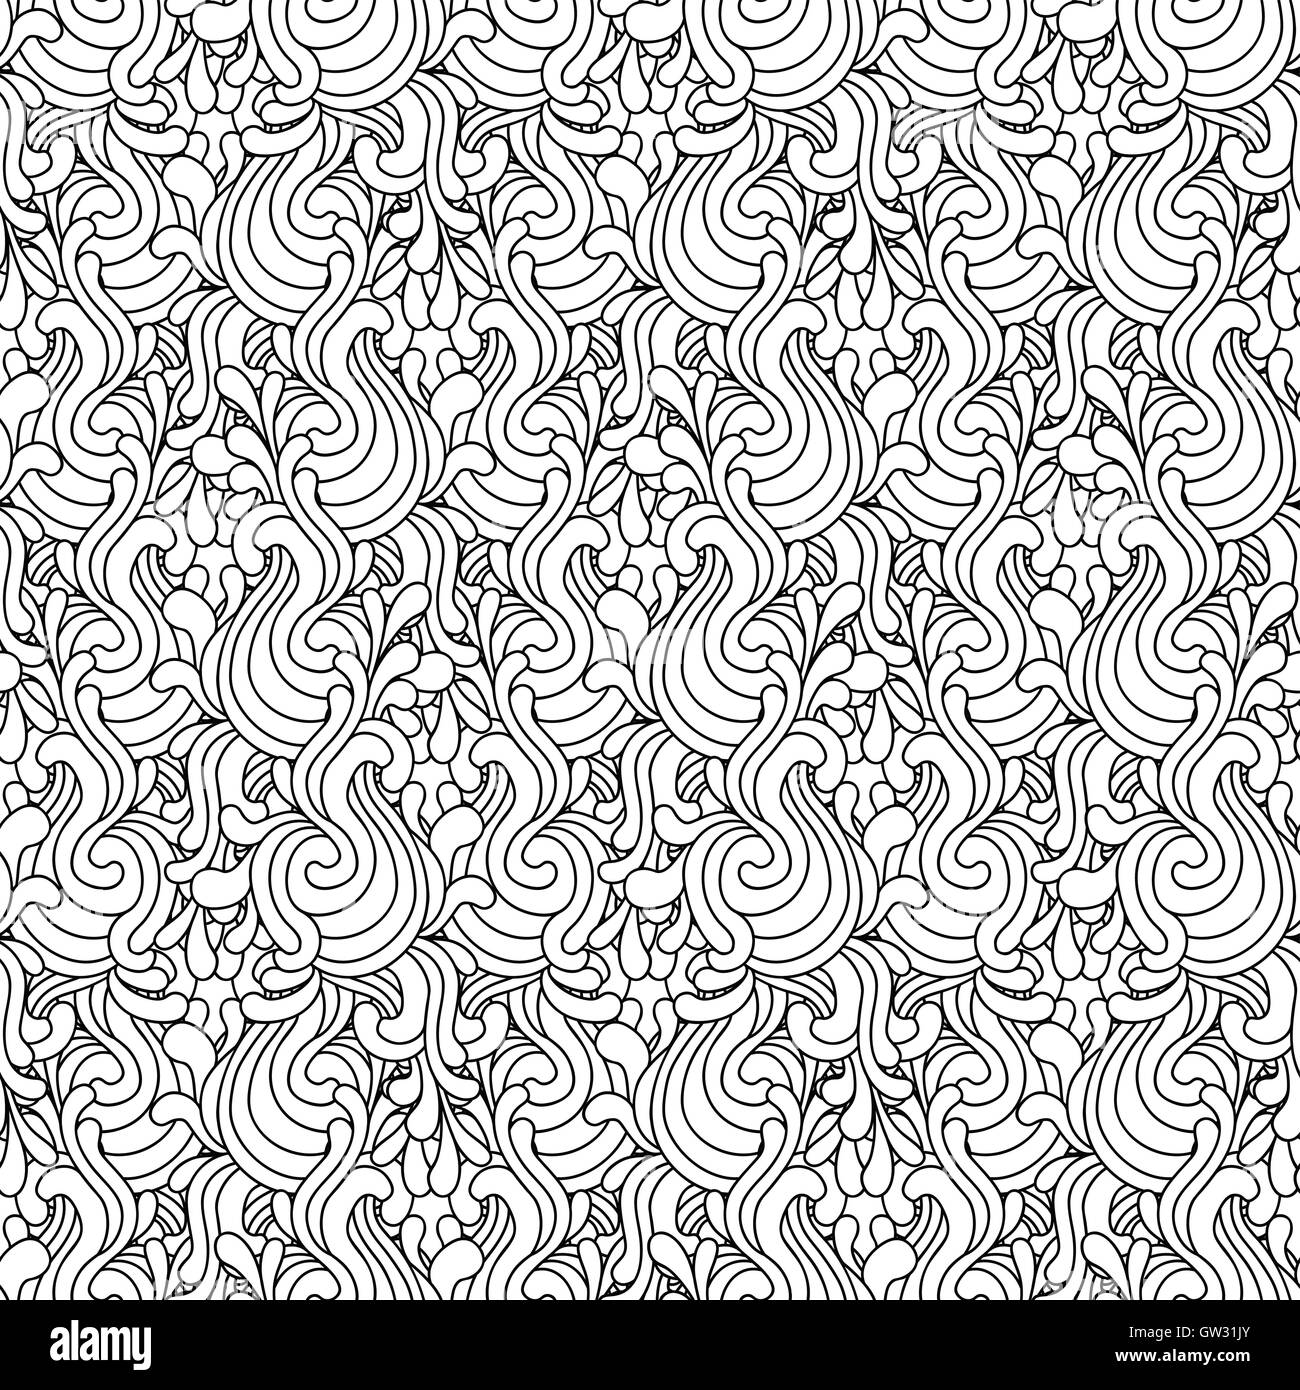 Seamless decorative zentangle graphic pattern on white background Stock Vector